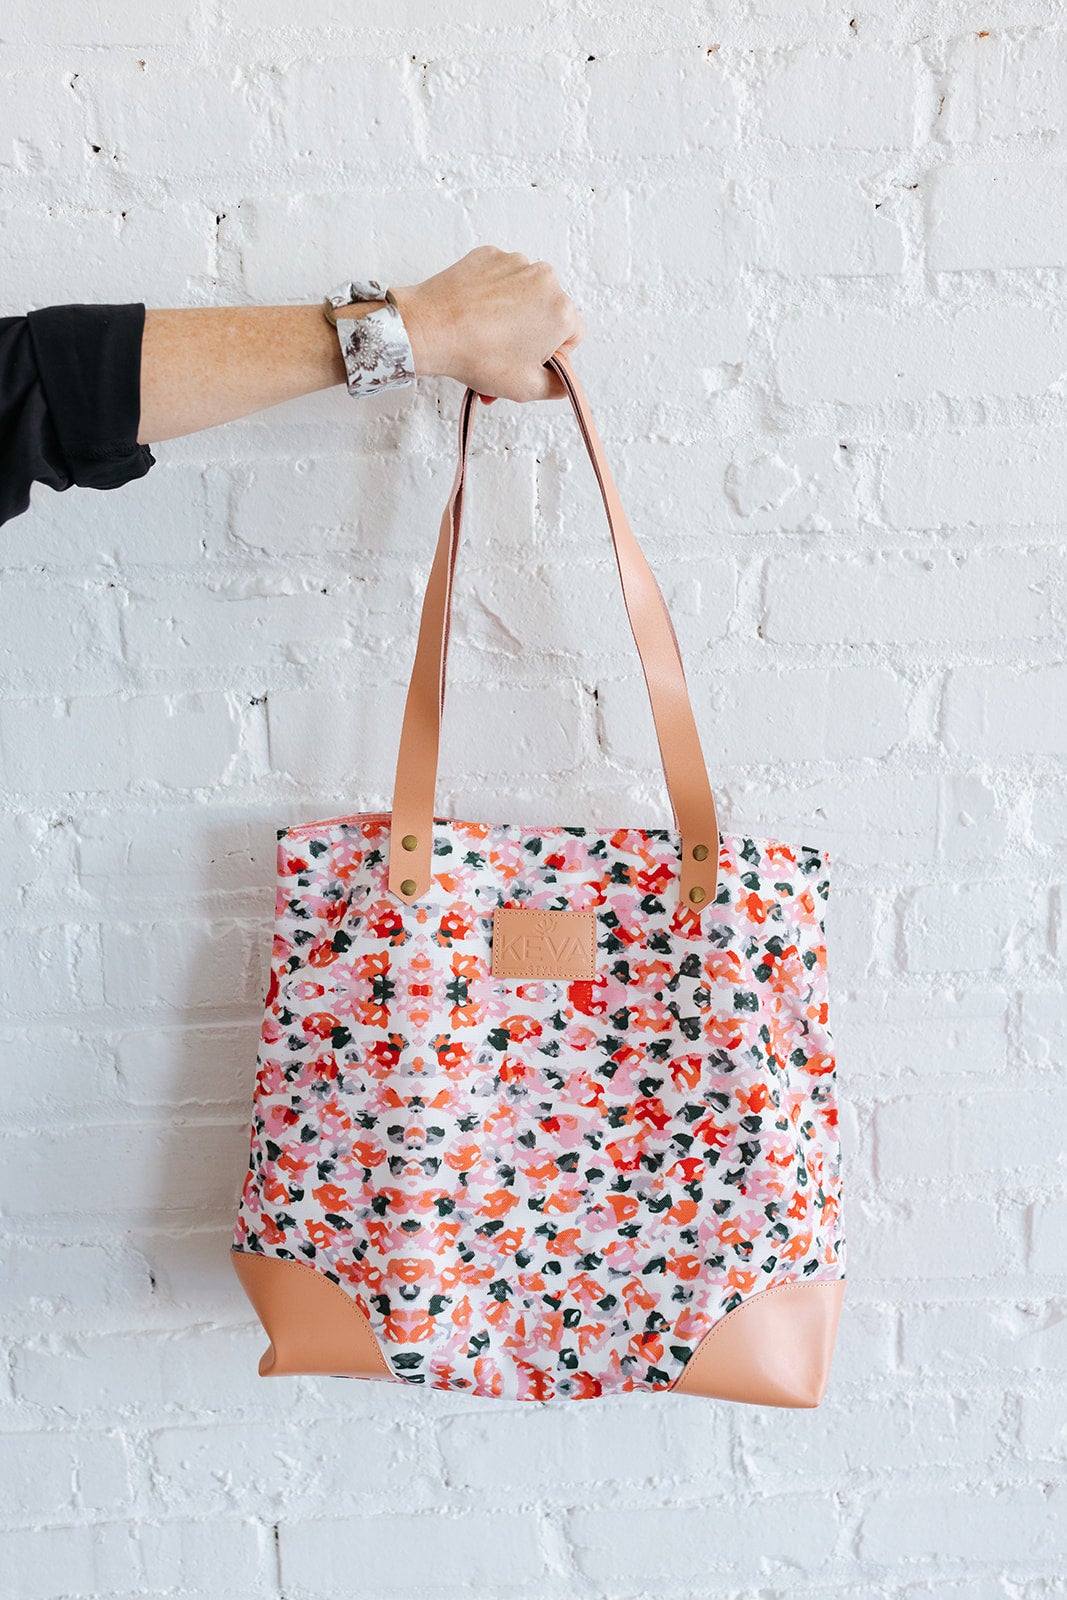 Kate Spade Carry-On Tote Bags